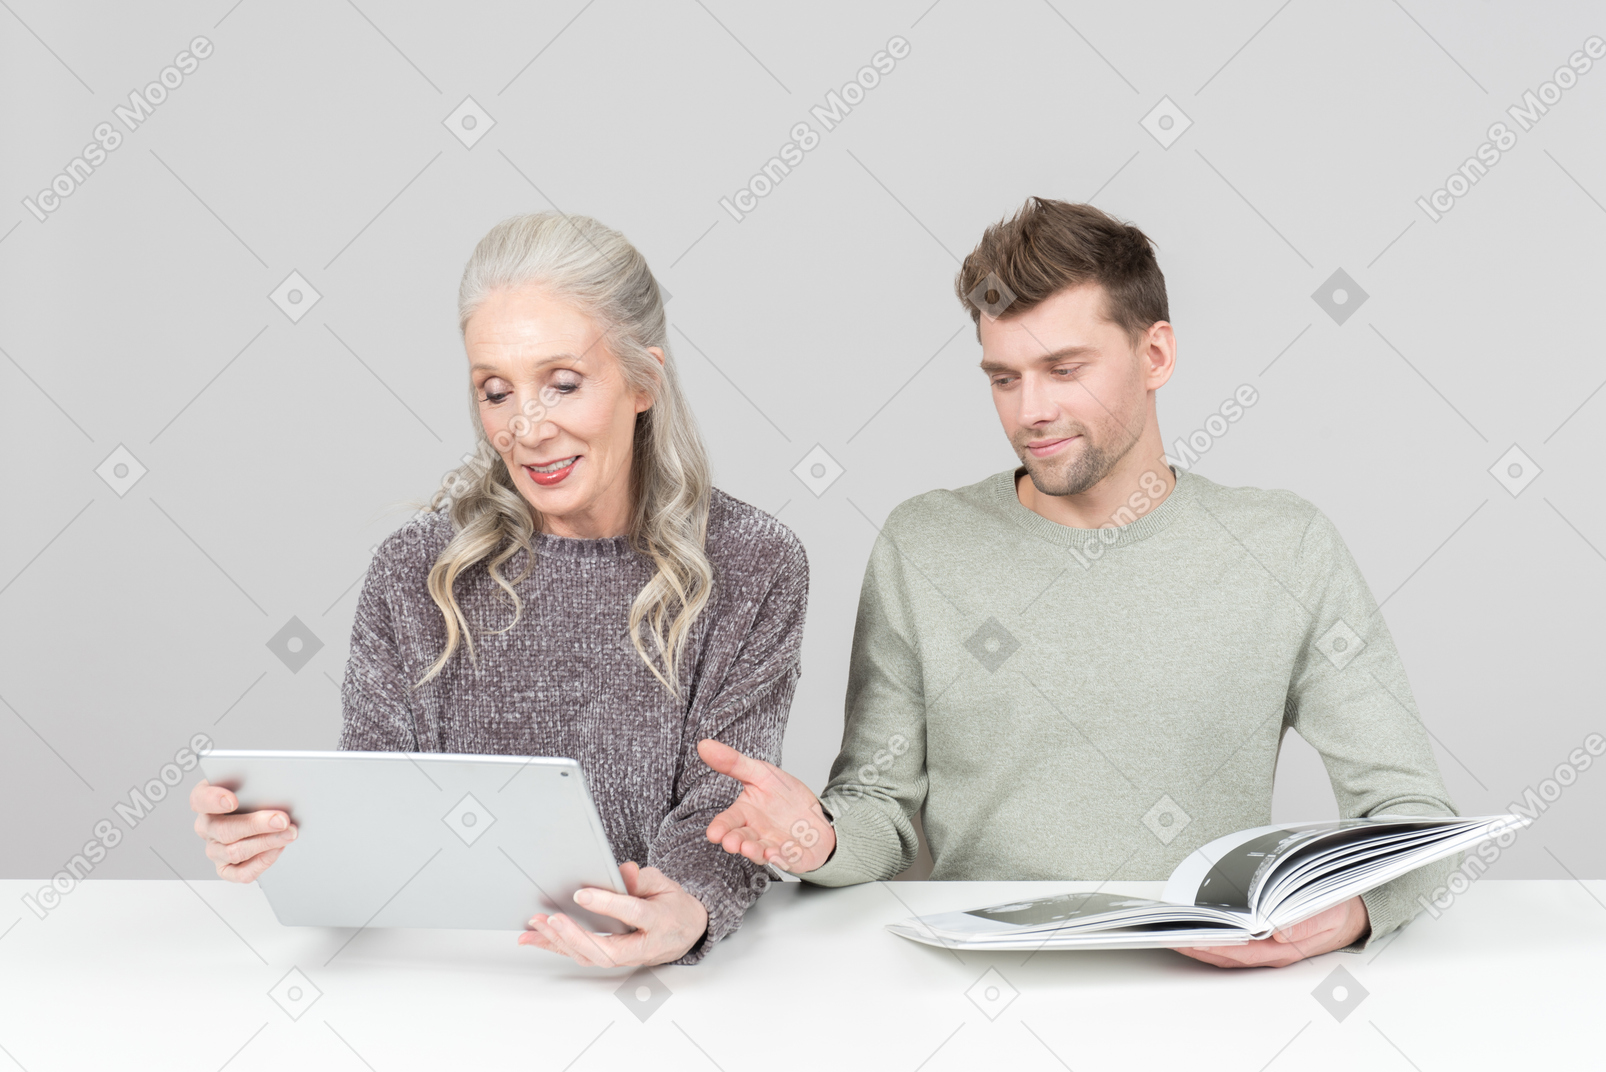 Old woman and young man going through a book together